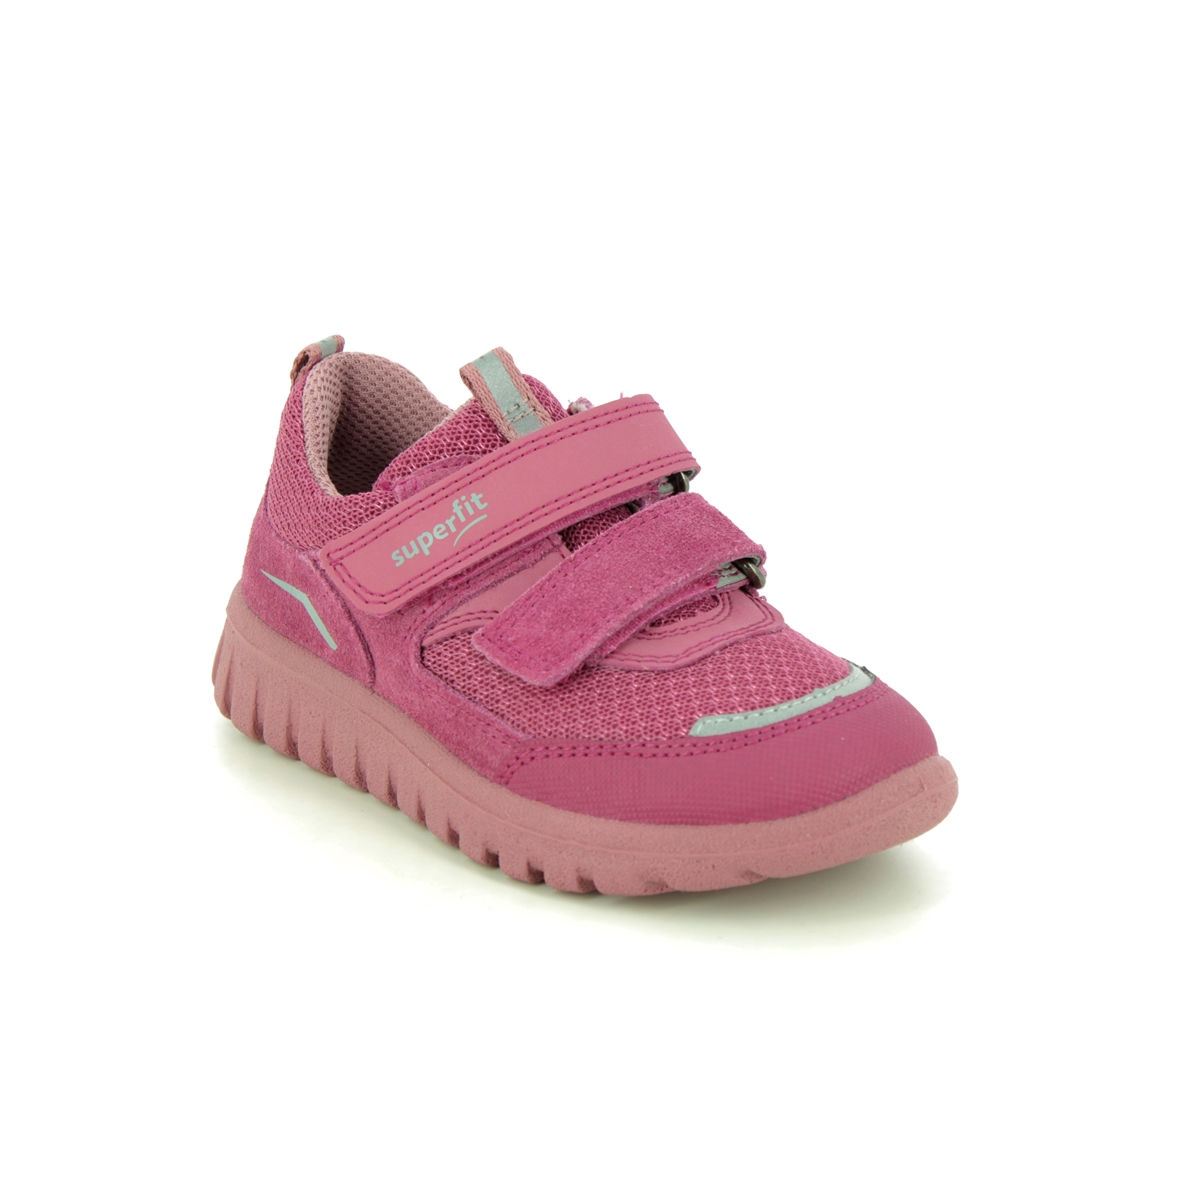 Superfit Sport7 Mini 2V Hot Pink Kids Girls Trainers 1006194-5520 In Size 25 In Plain Hot Pink For kids